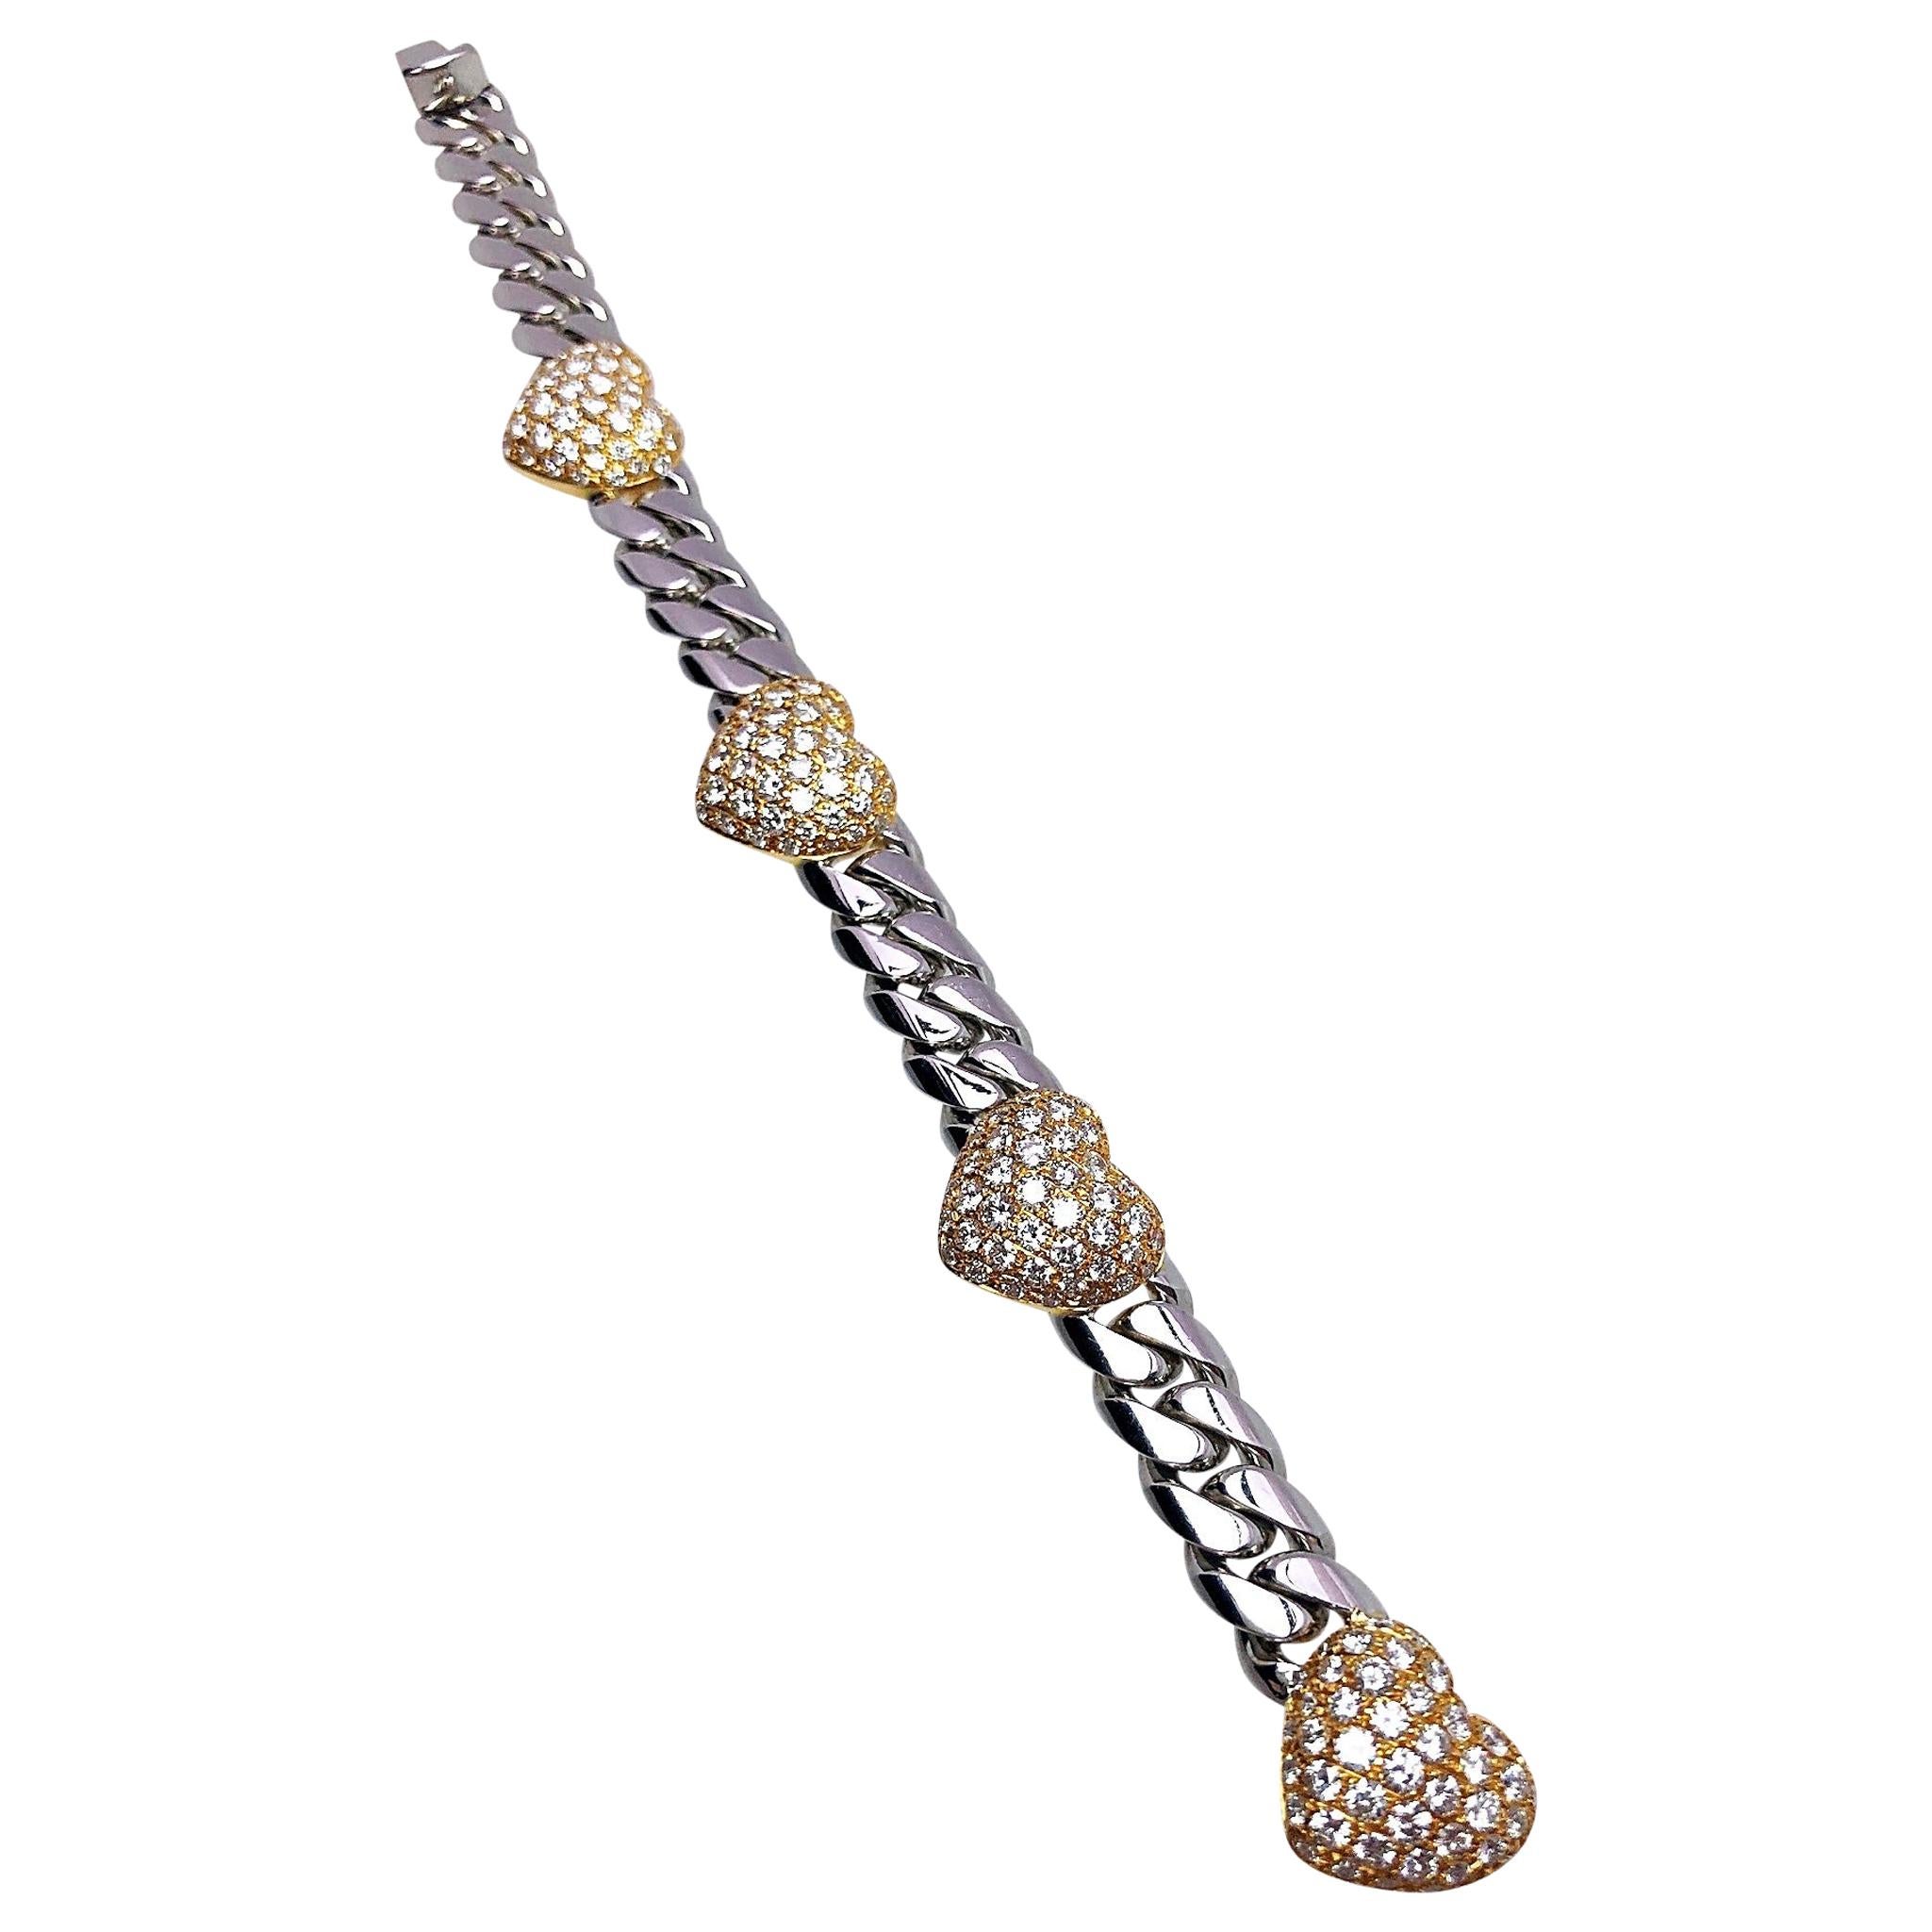 Brasolin 18KT White & Rose Gold Puffed heart Link Bracelet with 7.46CT. Diamonds